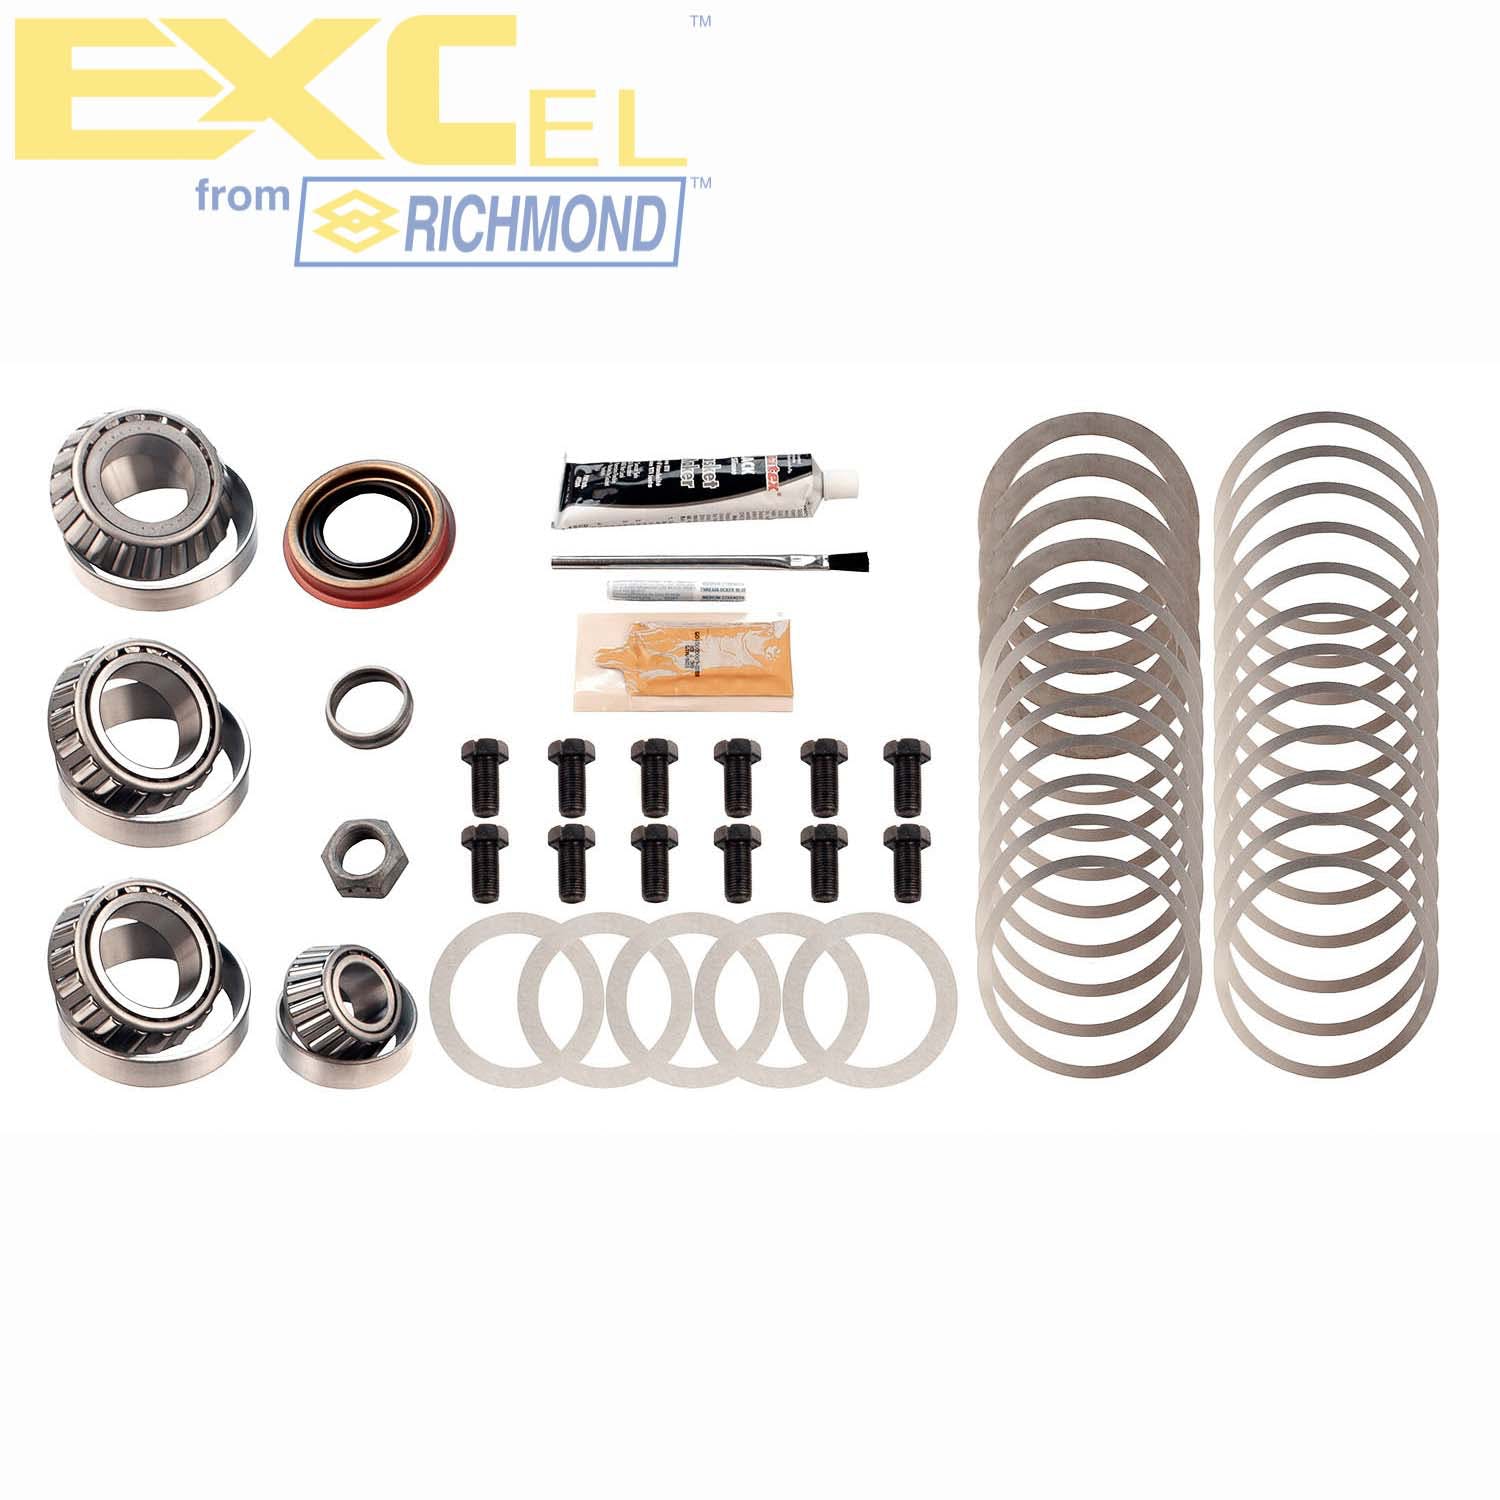 Excel XL-2015-1 Differential Bearing Kit